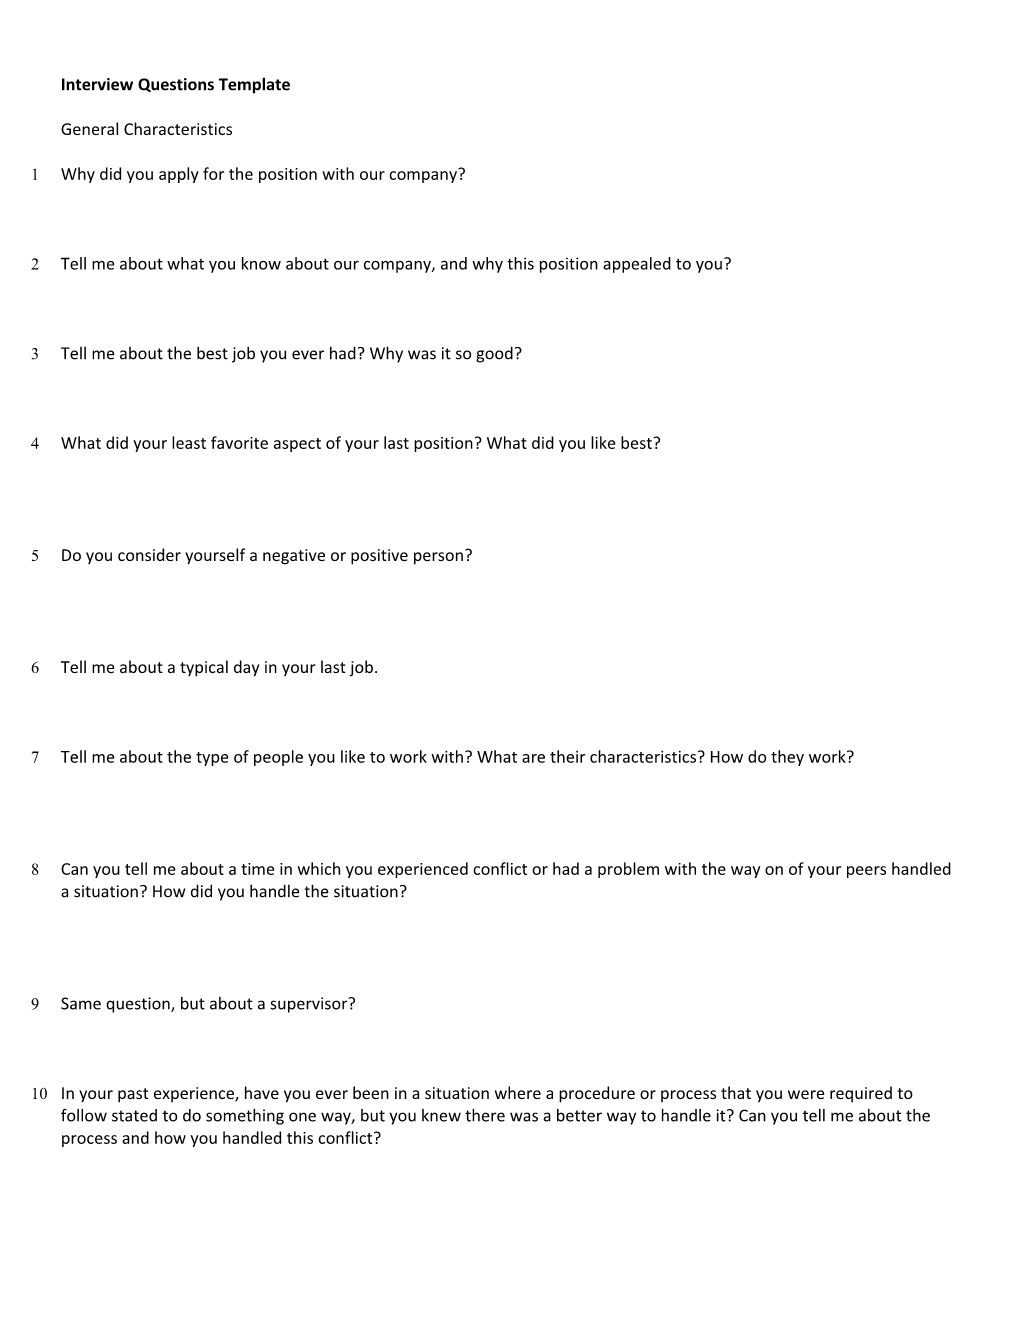 SPIES0102: 1St Inflection HR Interview Questions